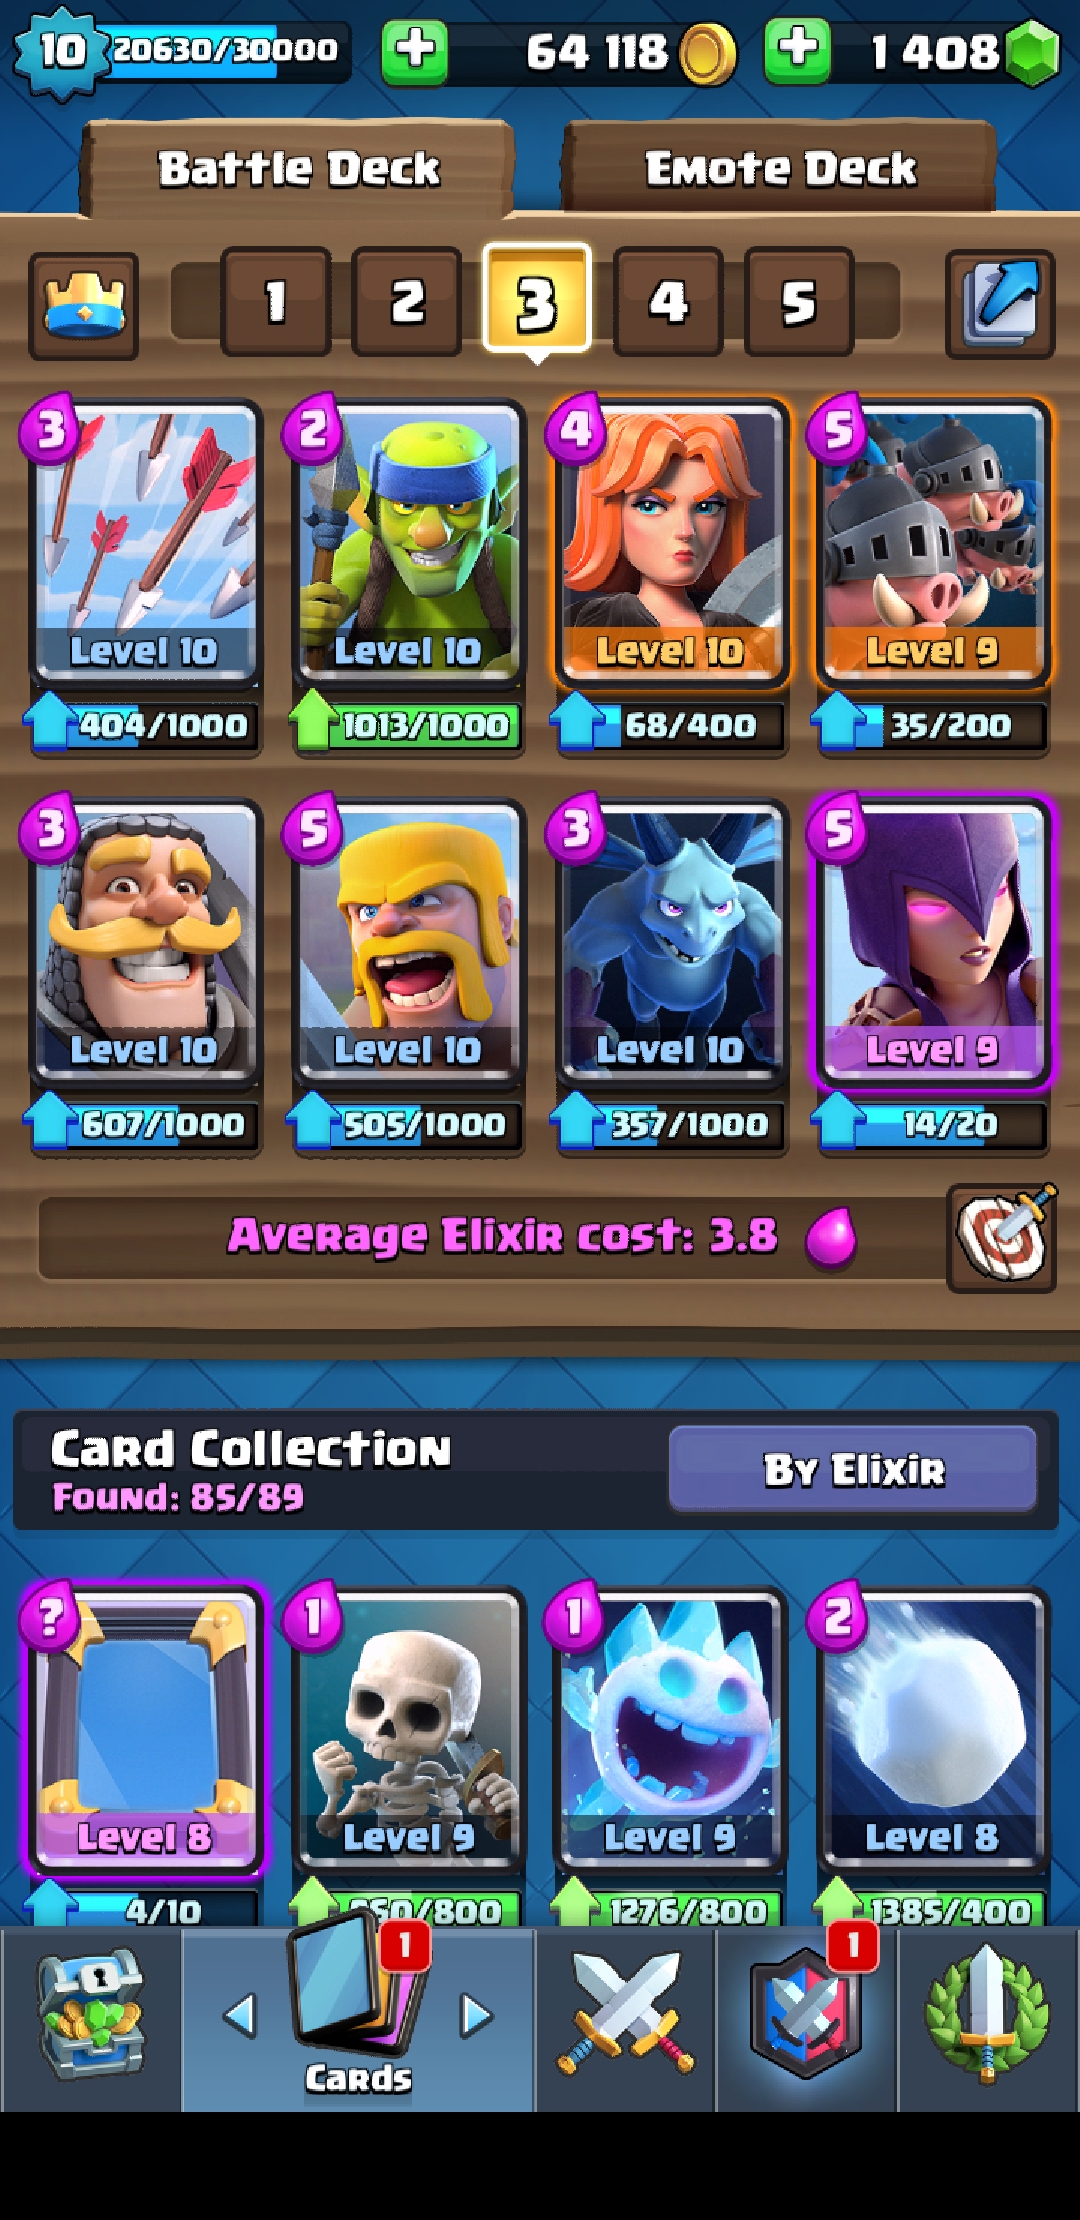 In Clash Royale, what is the best deck for getting from Arena 10